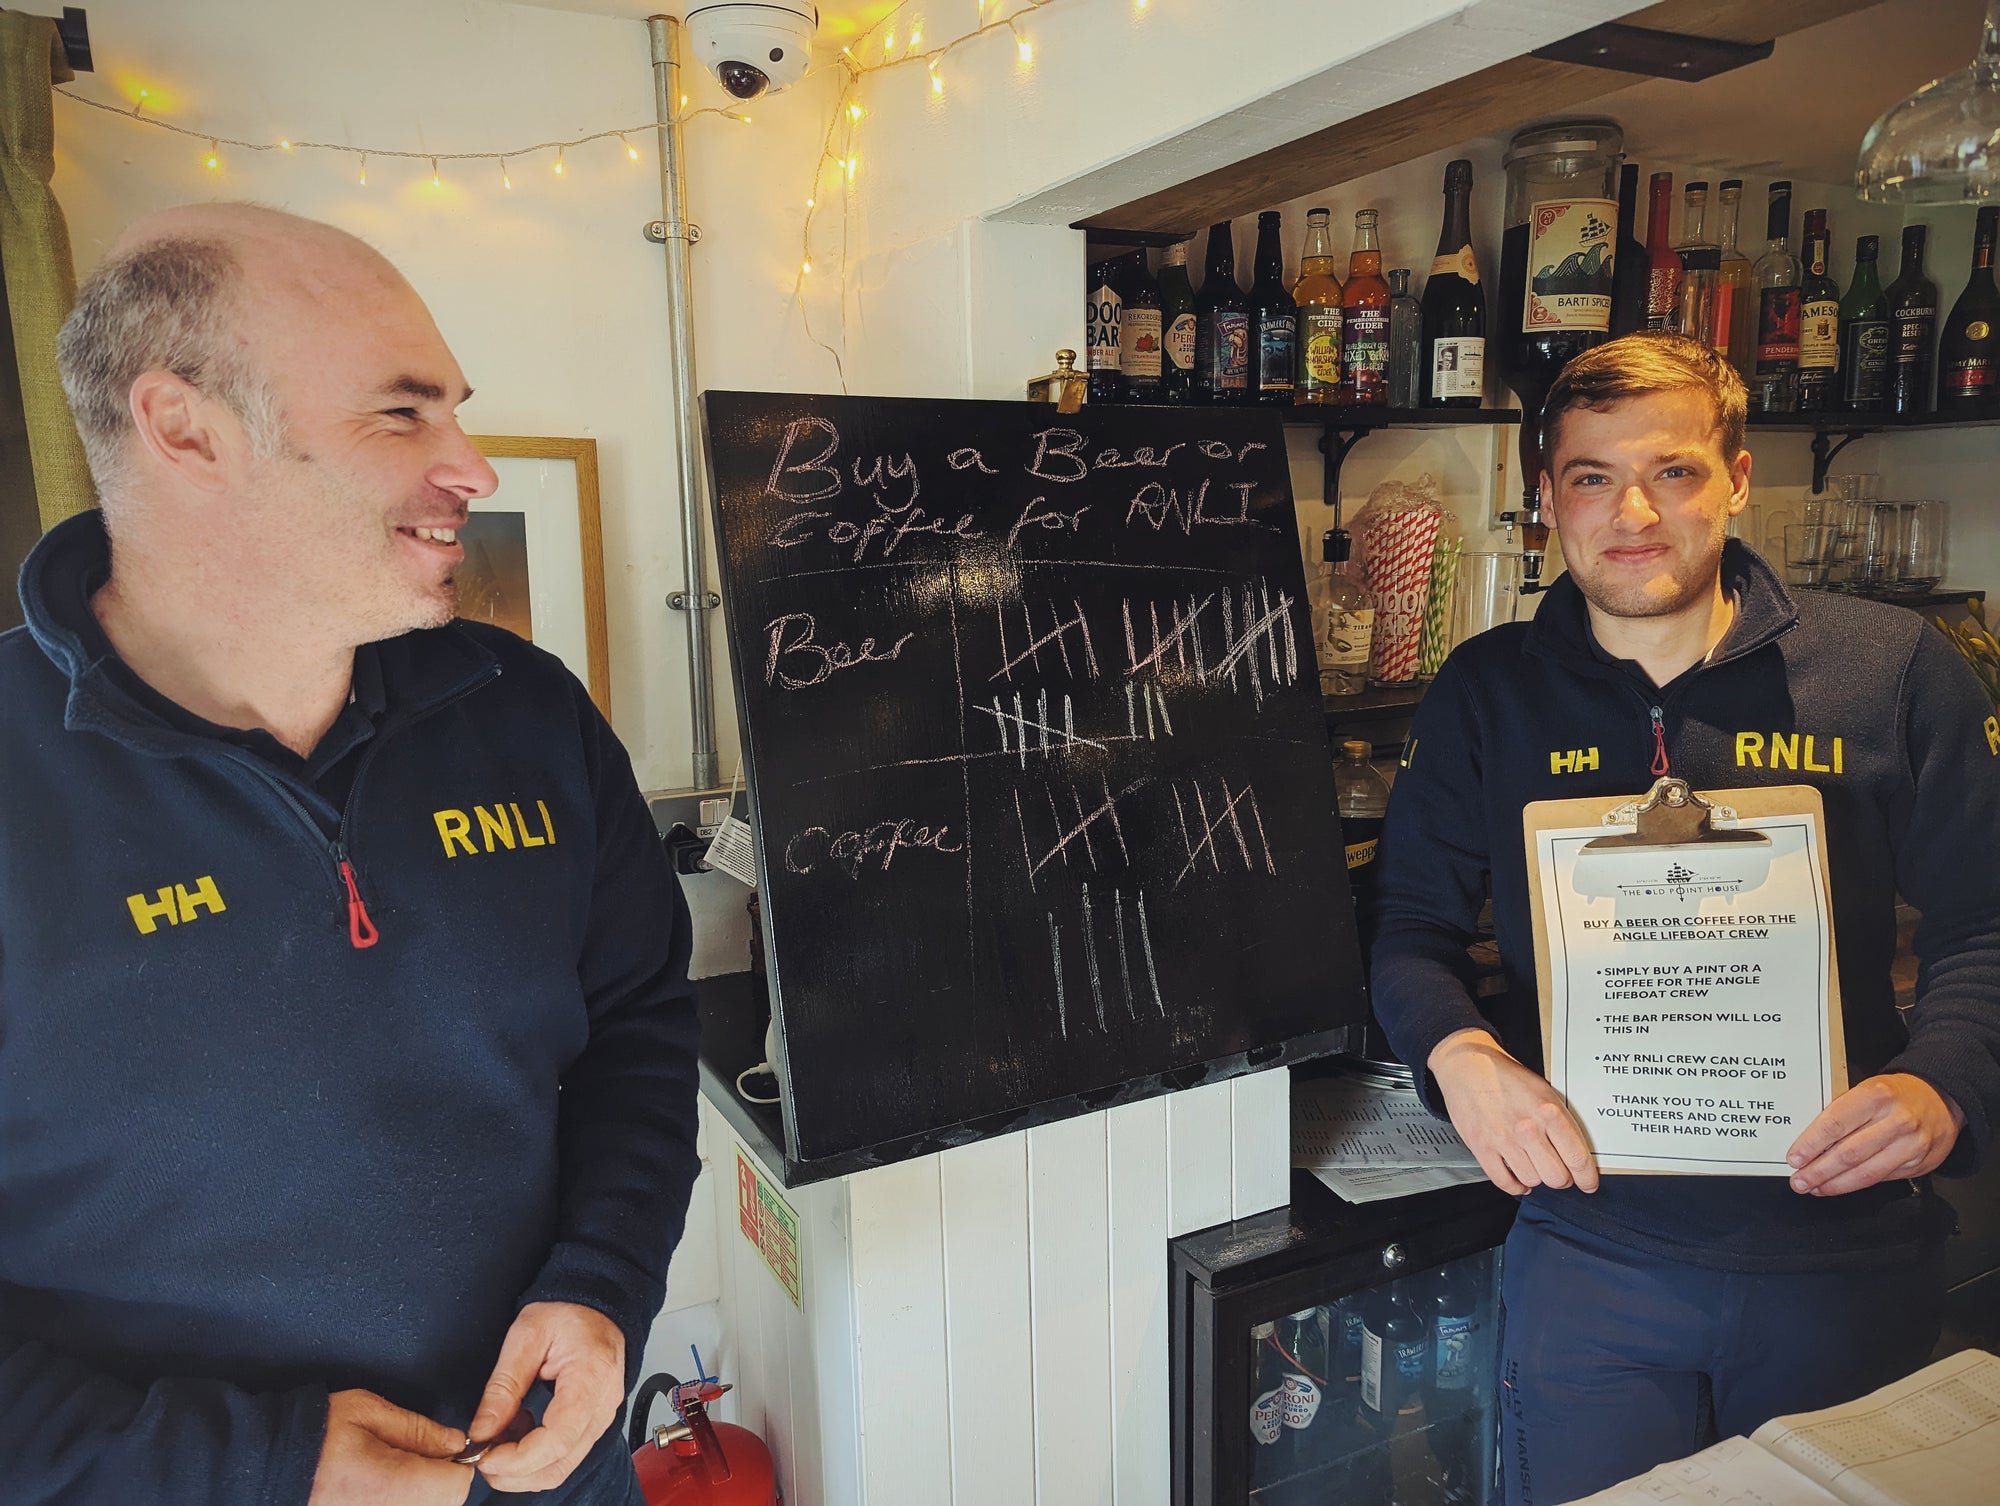 RNLI support - BUY AN RNLI CREW MEMBER A COFFEE OR A PINT !